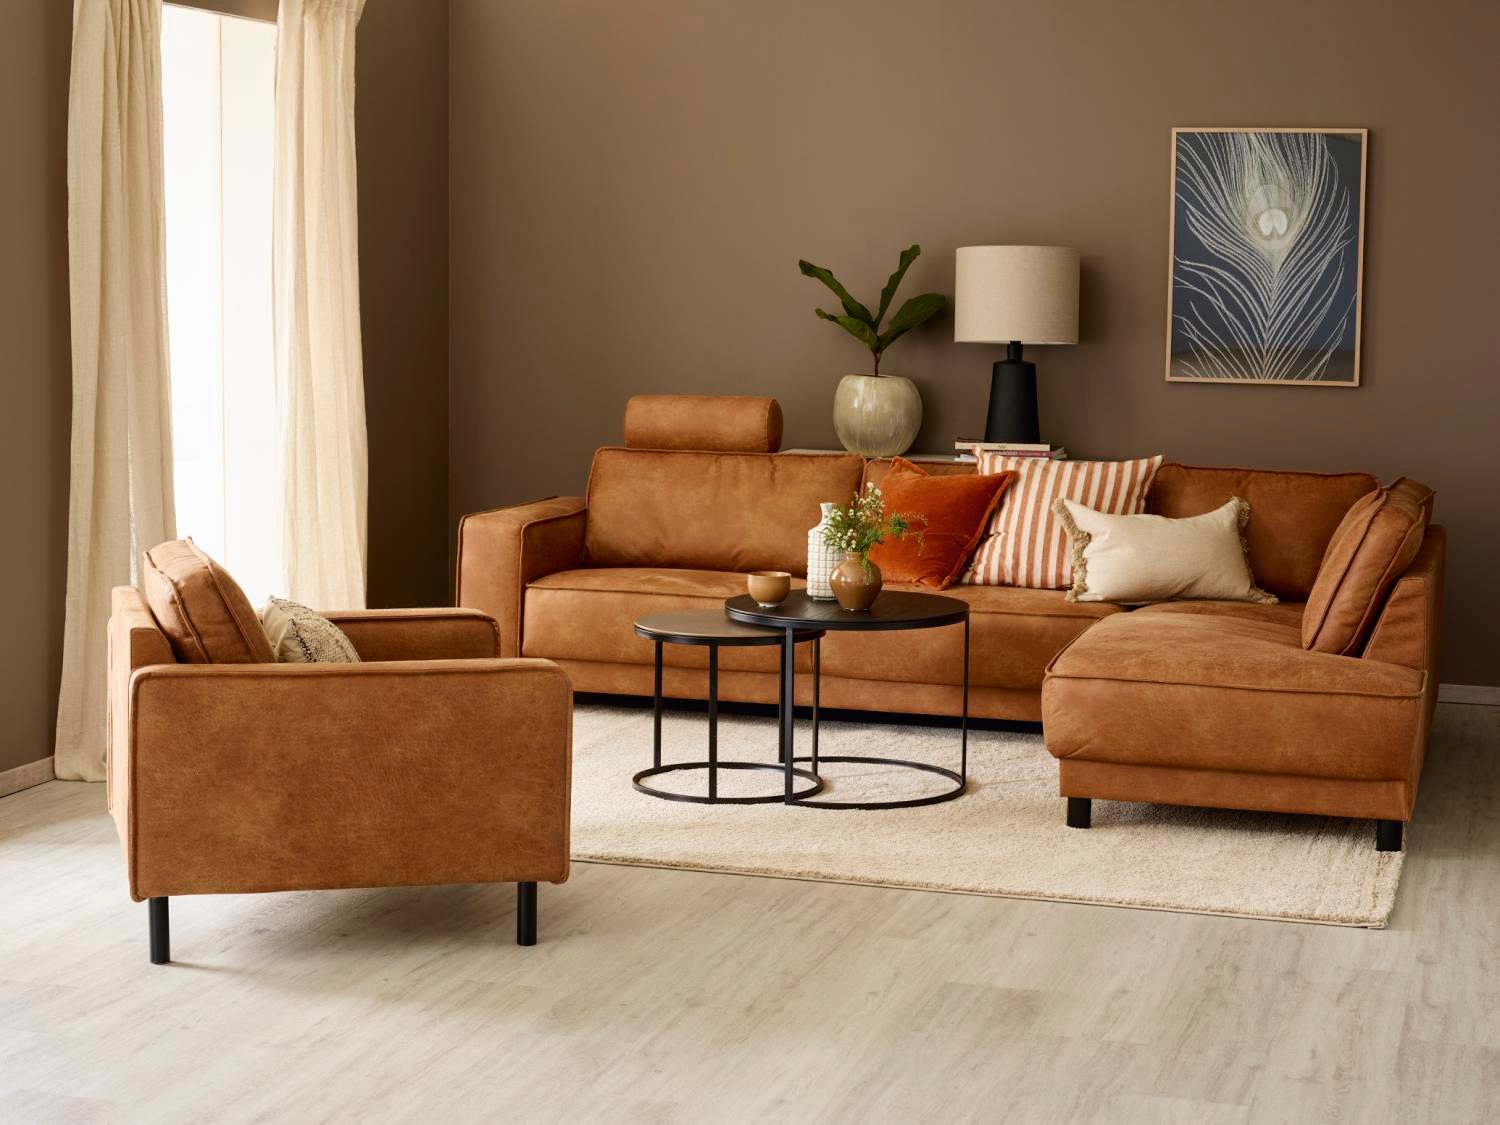 Interior design, Living room, Brown, Furniture, Table, Property, Couch, Comfort, Wood, Houseplant